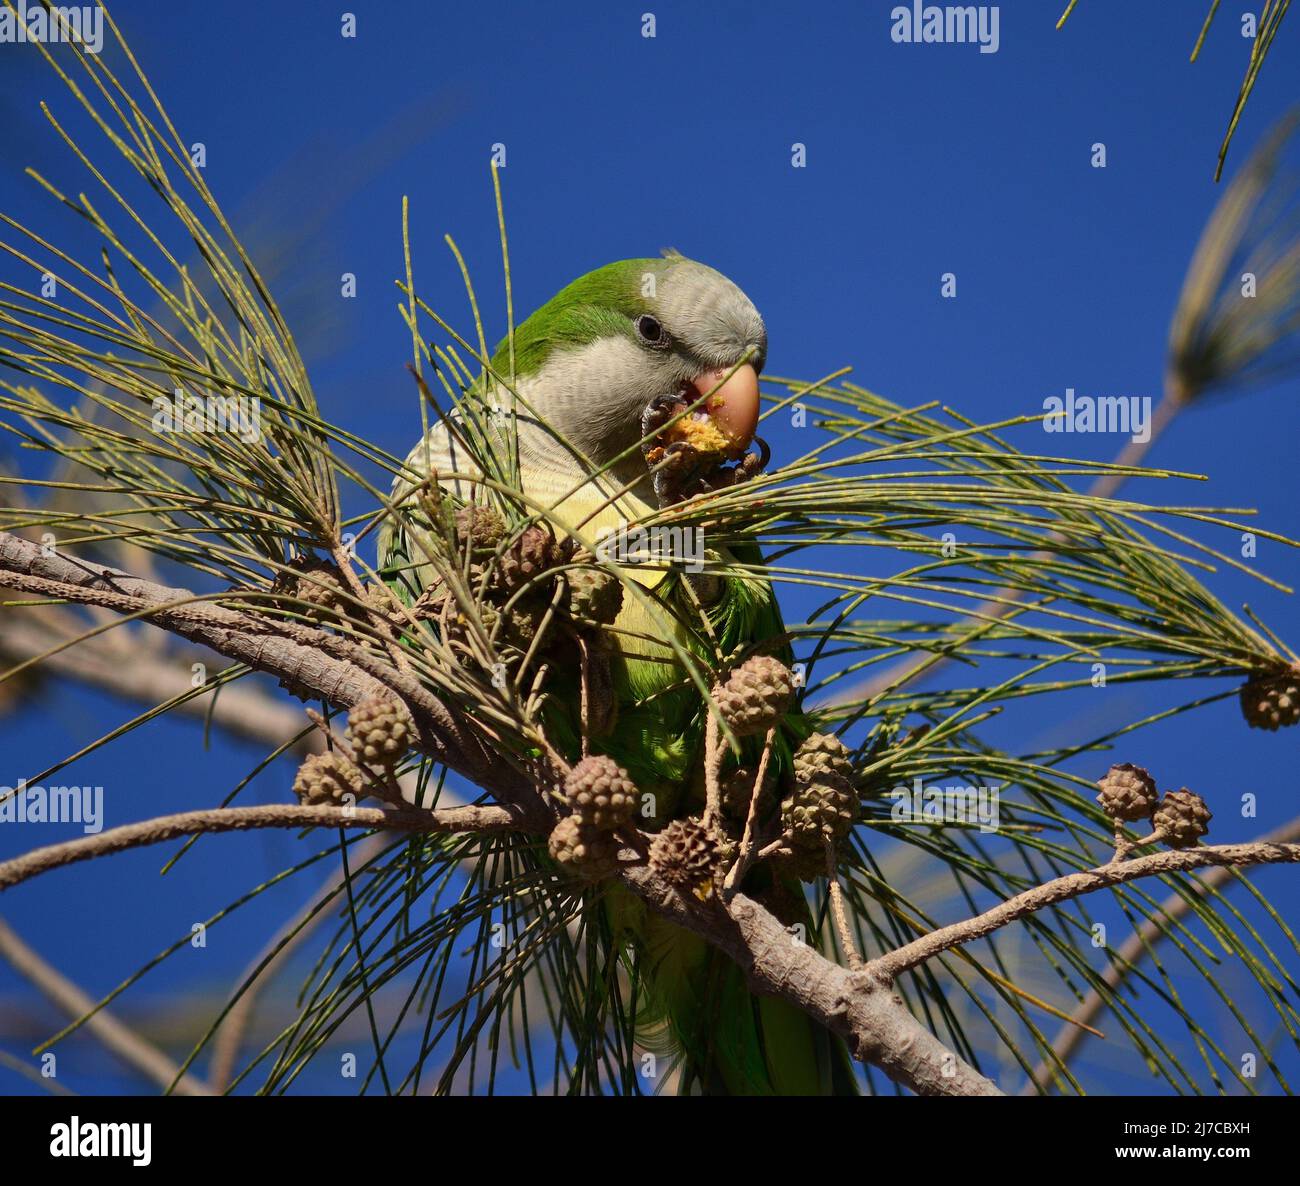 Parakeet eating fruits of the Casuarina tree and blue sky in the background Stock Photo